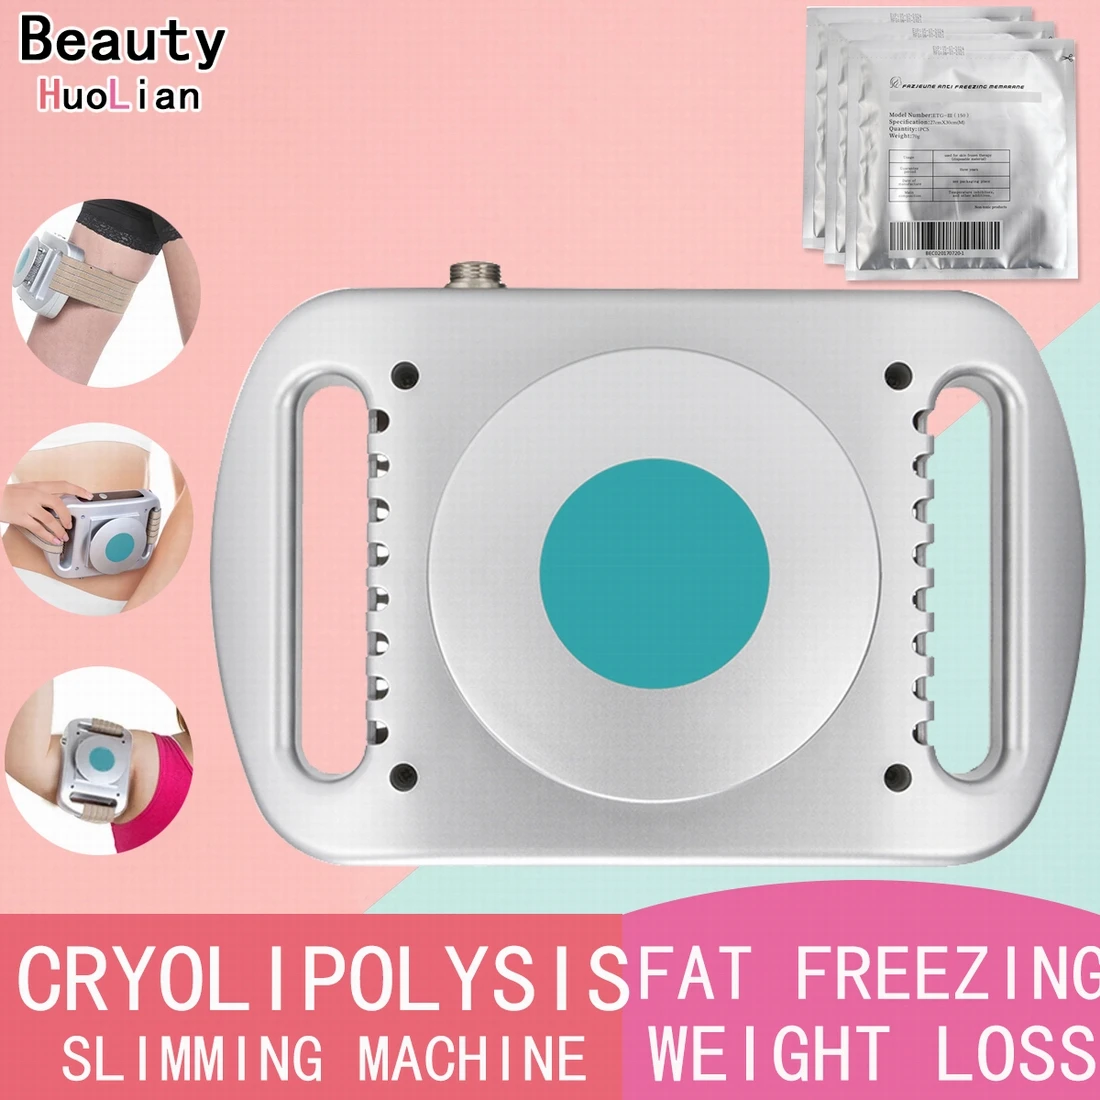 Dissolve Fat Cold Therapy Massager  Fat Freezing Machine Anti Free Cellulite For Cryolipolysis with 4pcs Antifreeze Membrane